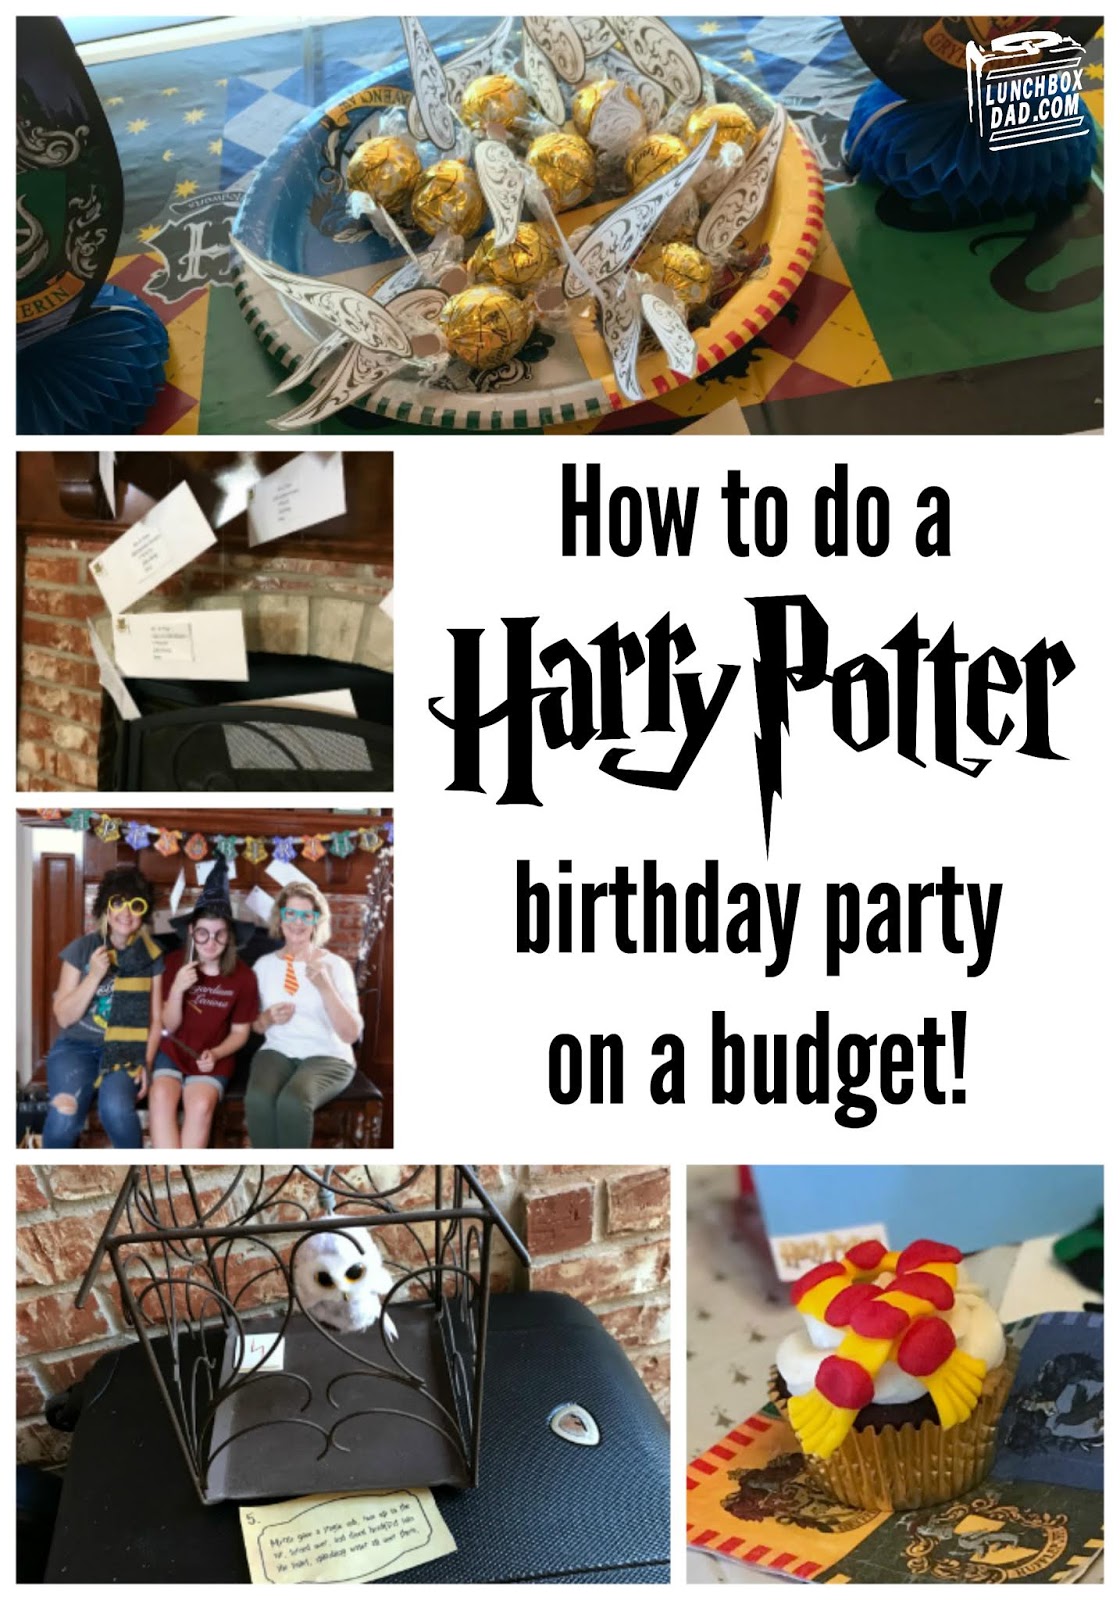 lunchbox-dad-harry-potter-birthday-party-ideas-on-a-budget